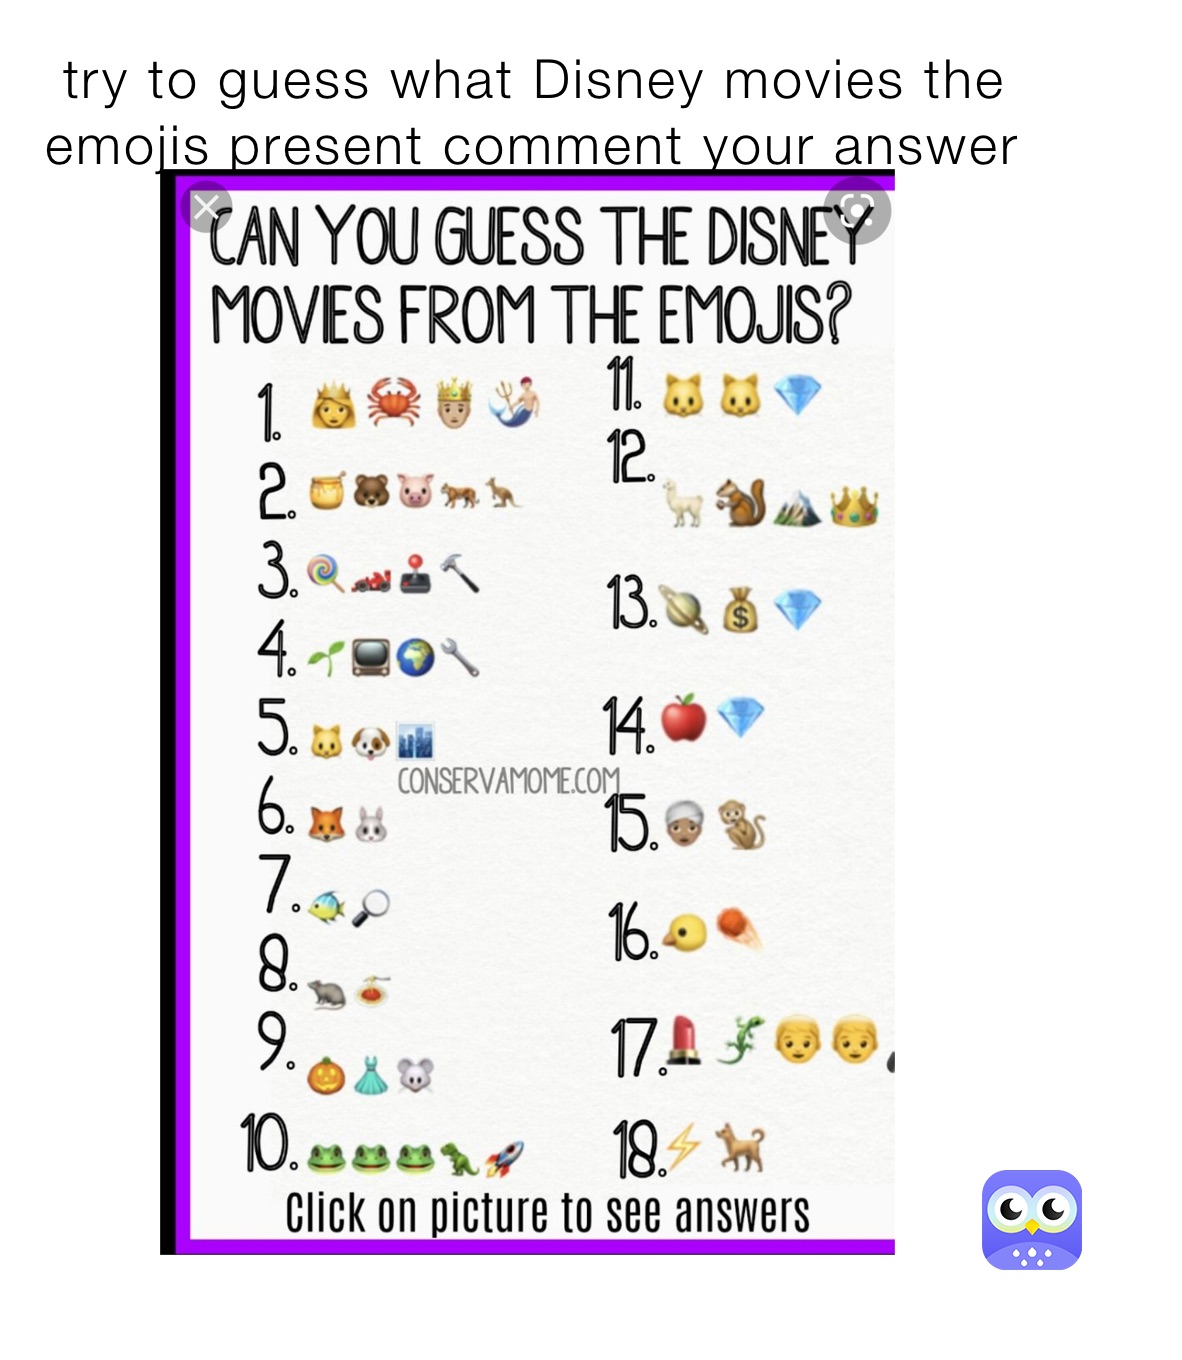  try to guess what Disney movies the emojis present comment your answer  